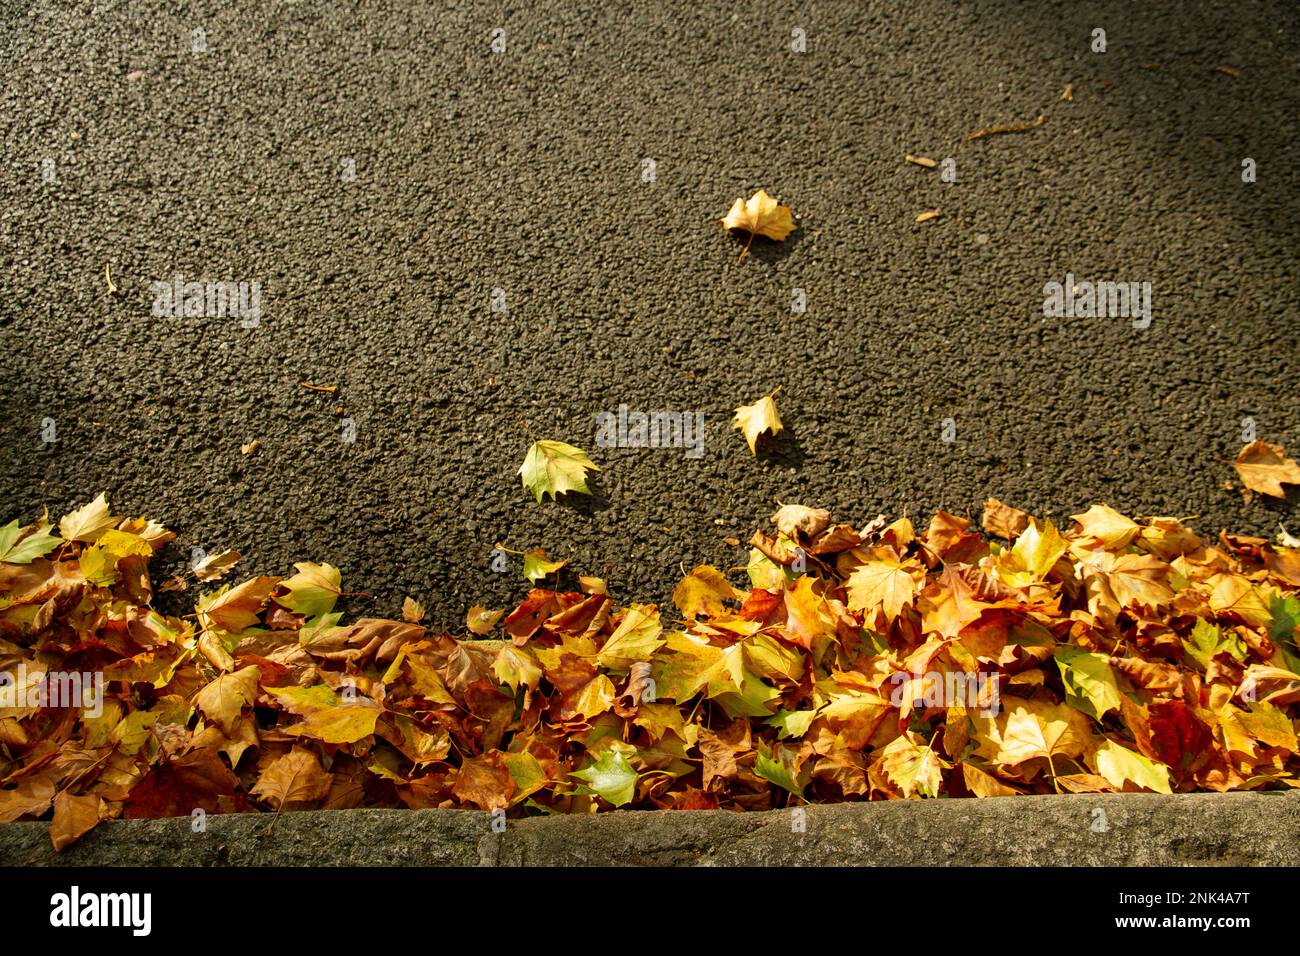 Looking down onto orange and green autumn leaves on a roadside. Includes space on the neutral road surface to include text. Stock Photo